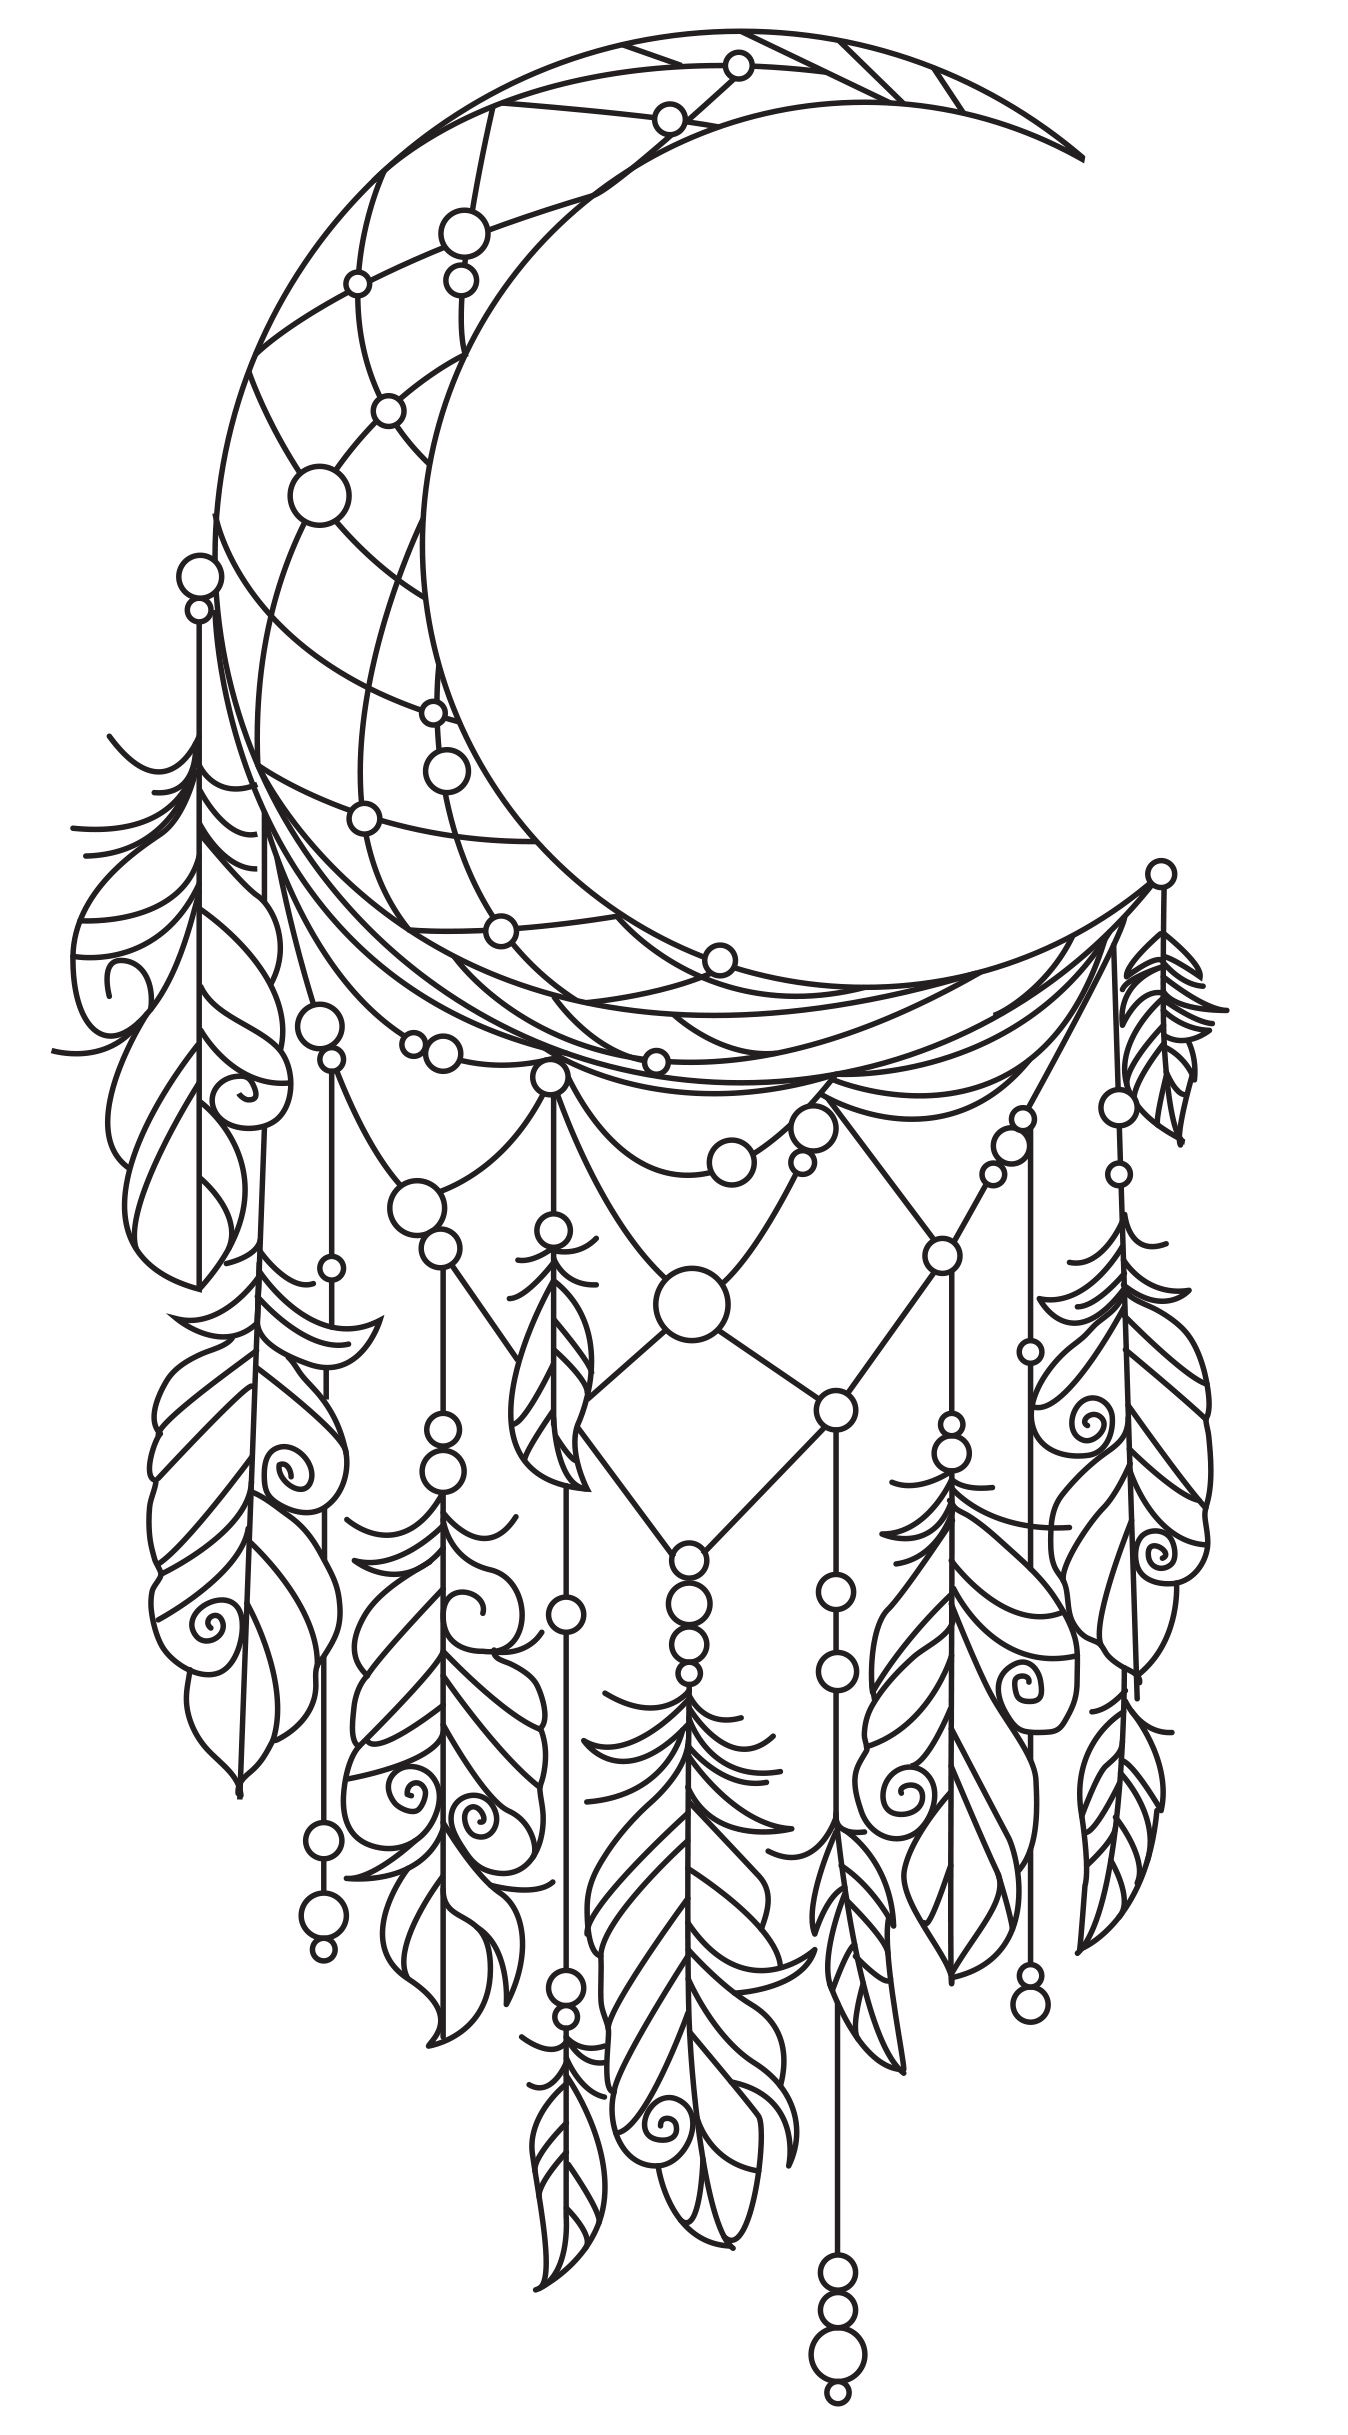 adult moon dream catcher coloring pages